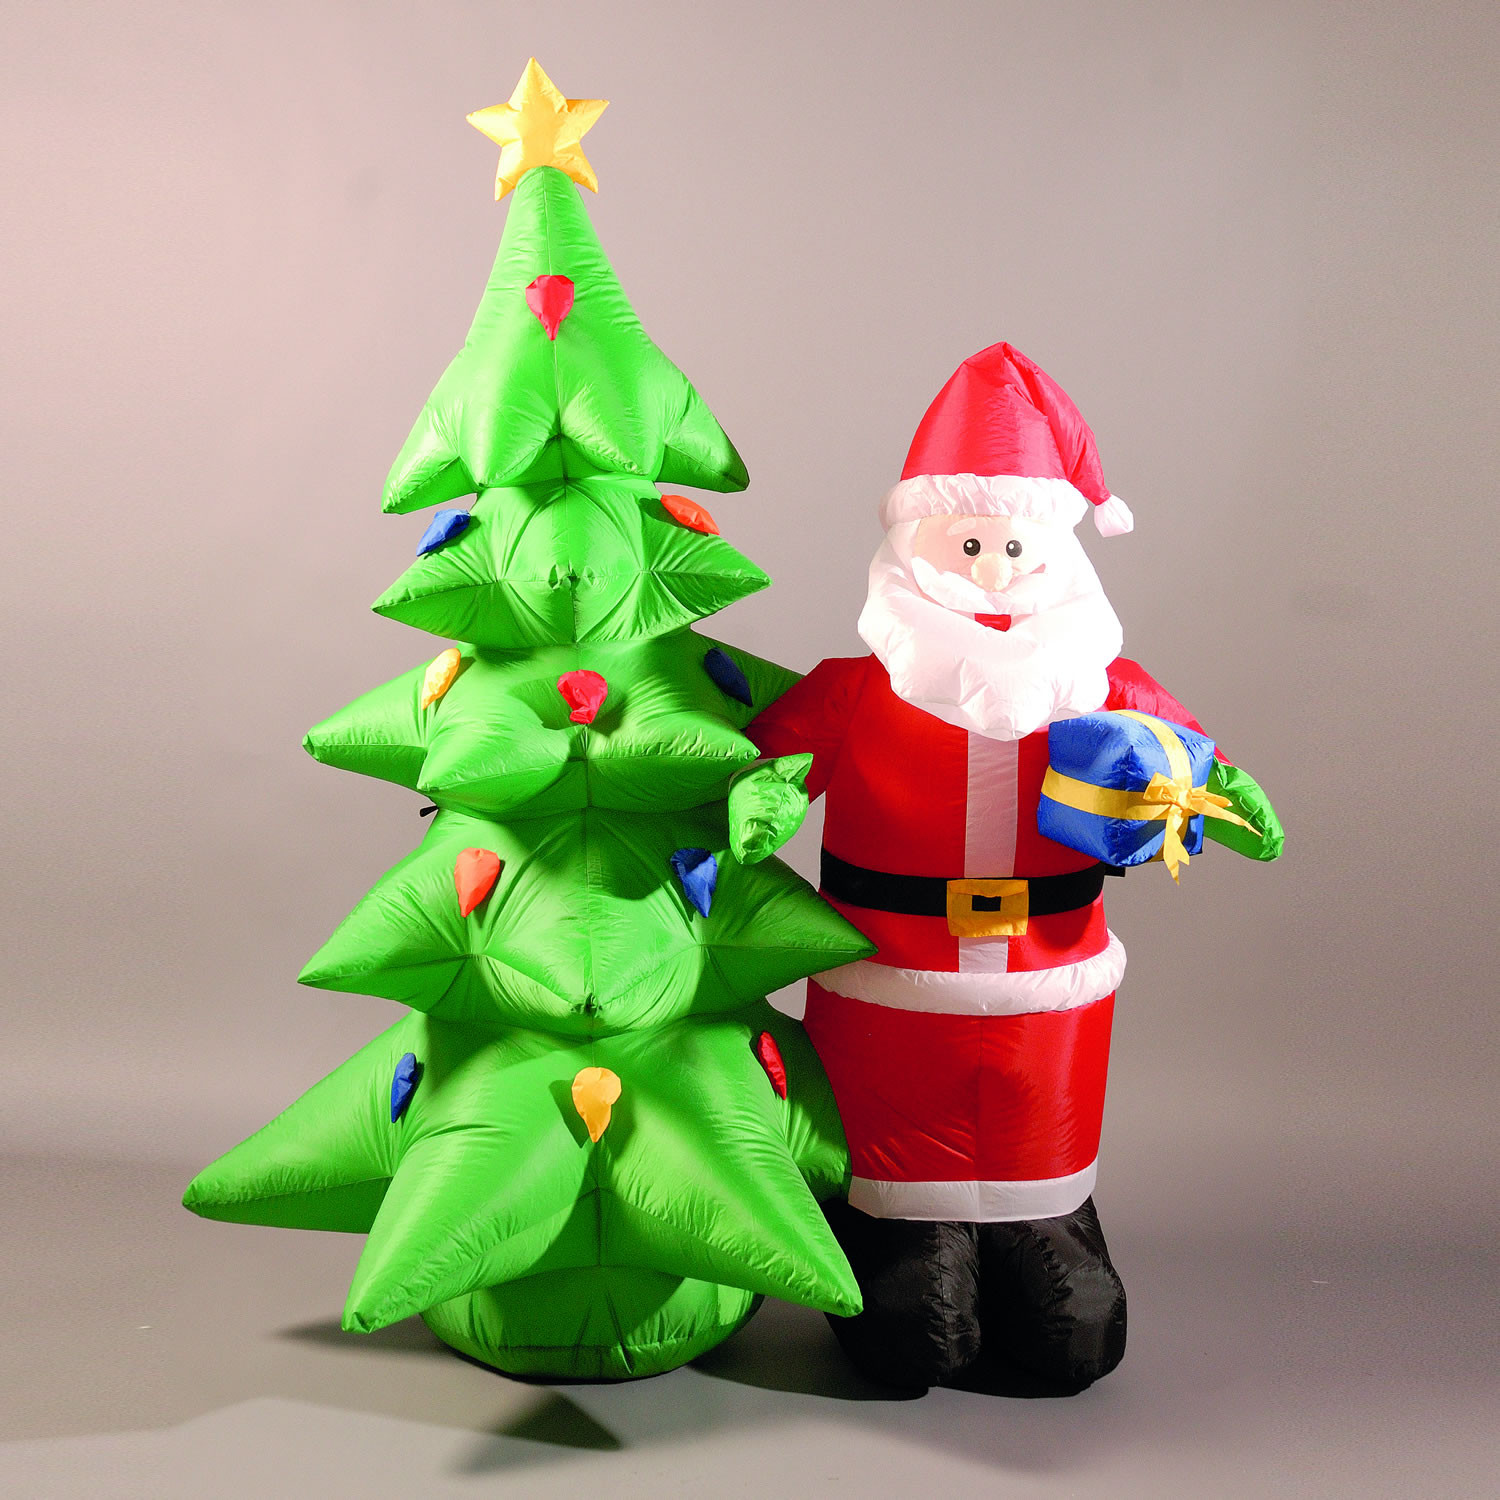 Inflatable Christmas Tree Indoor
 Inflatable 180cm 6ft Santa and Christmas Tree £60 2